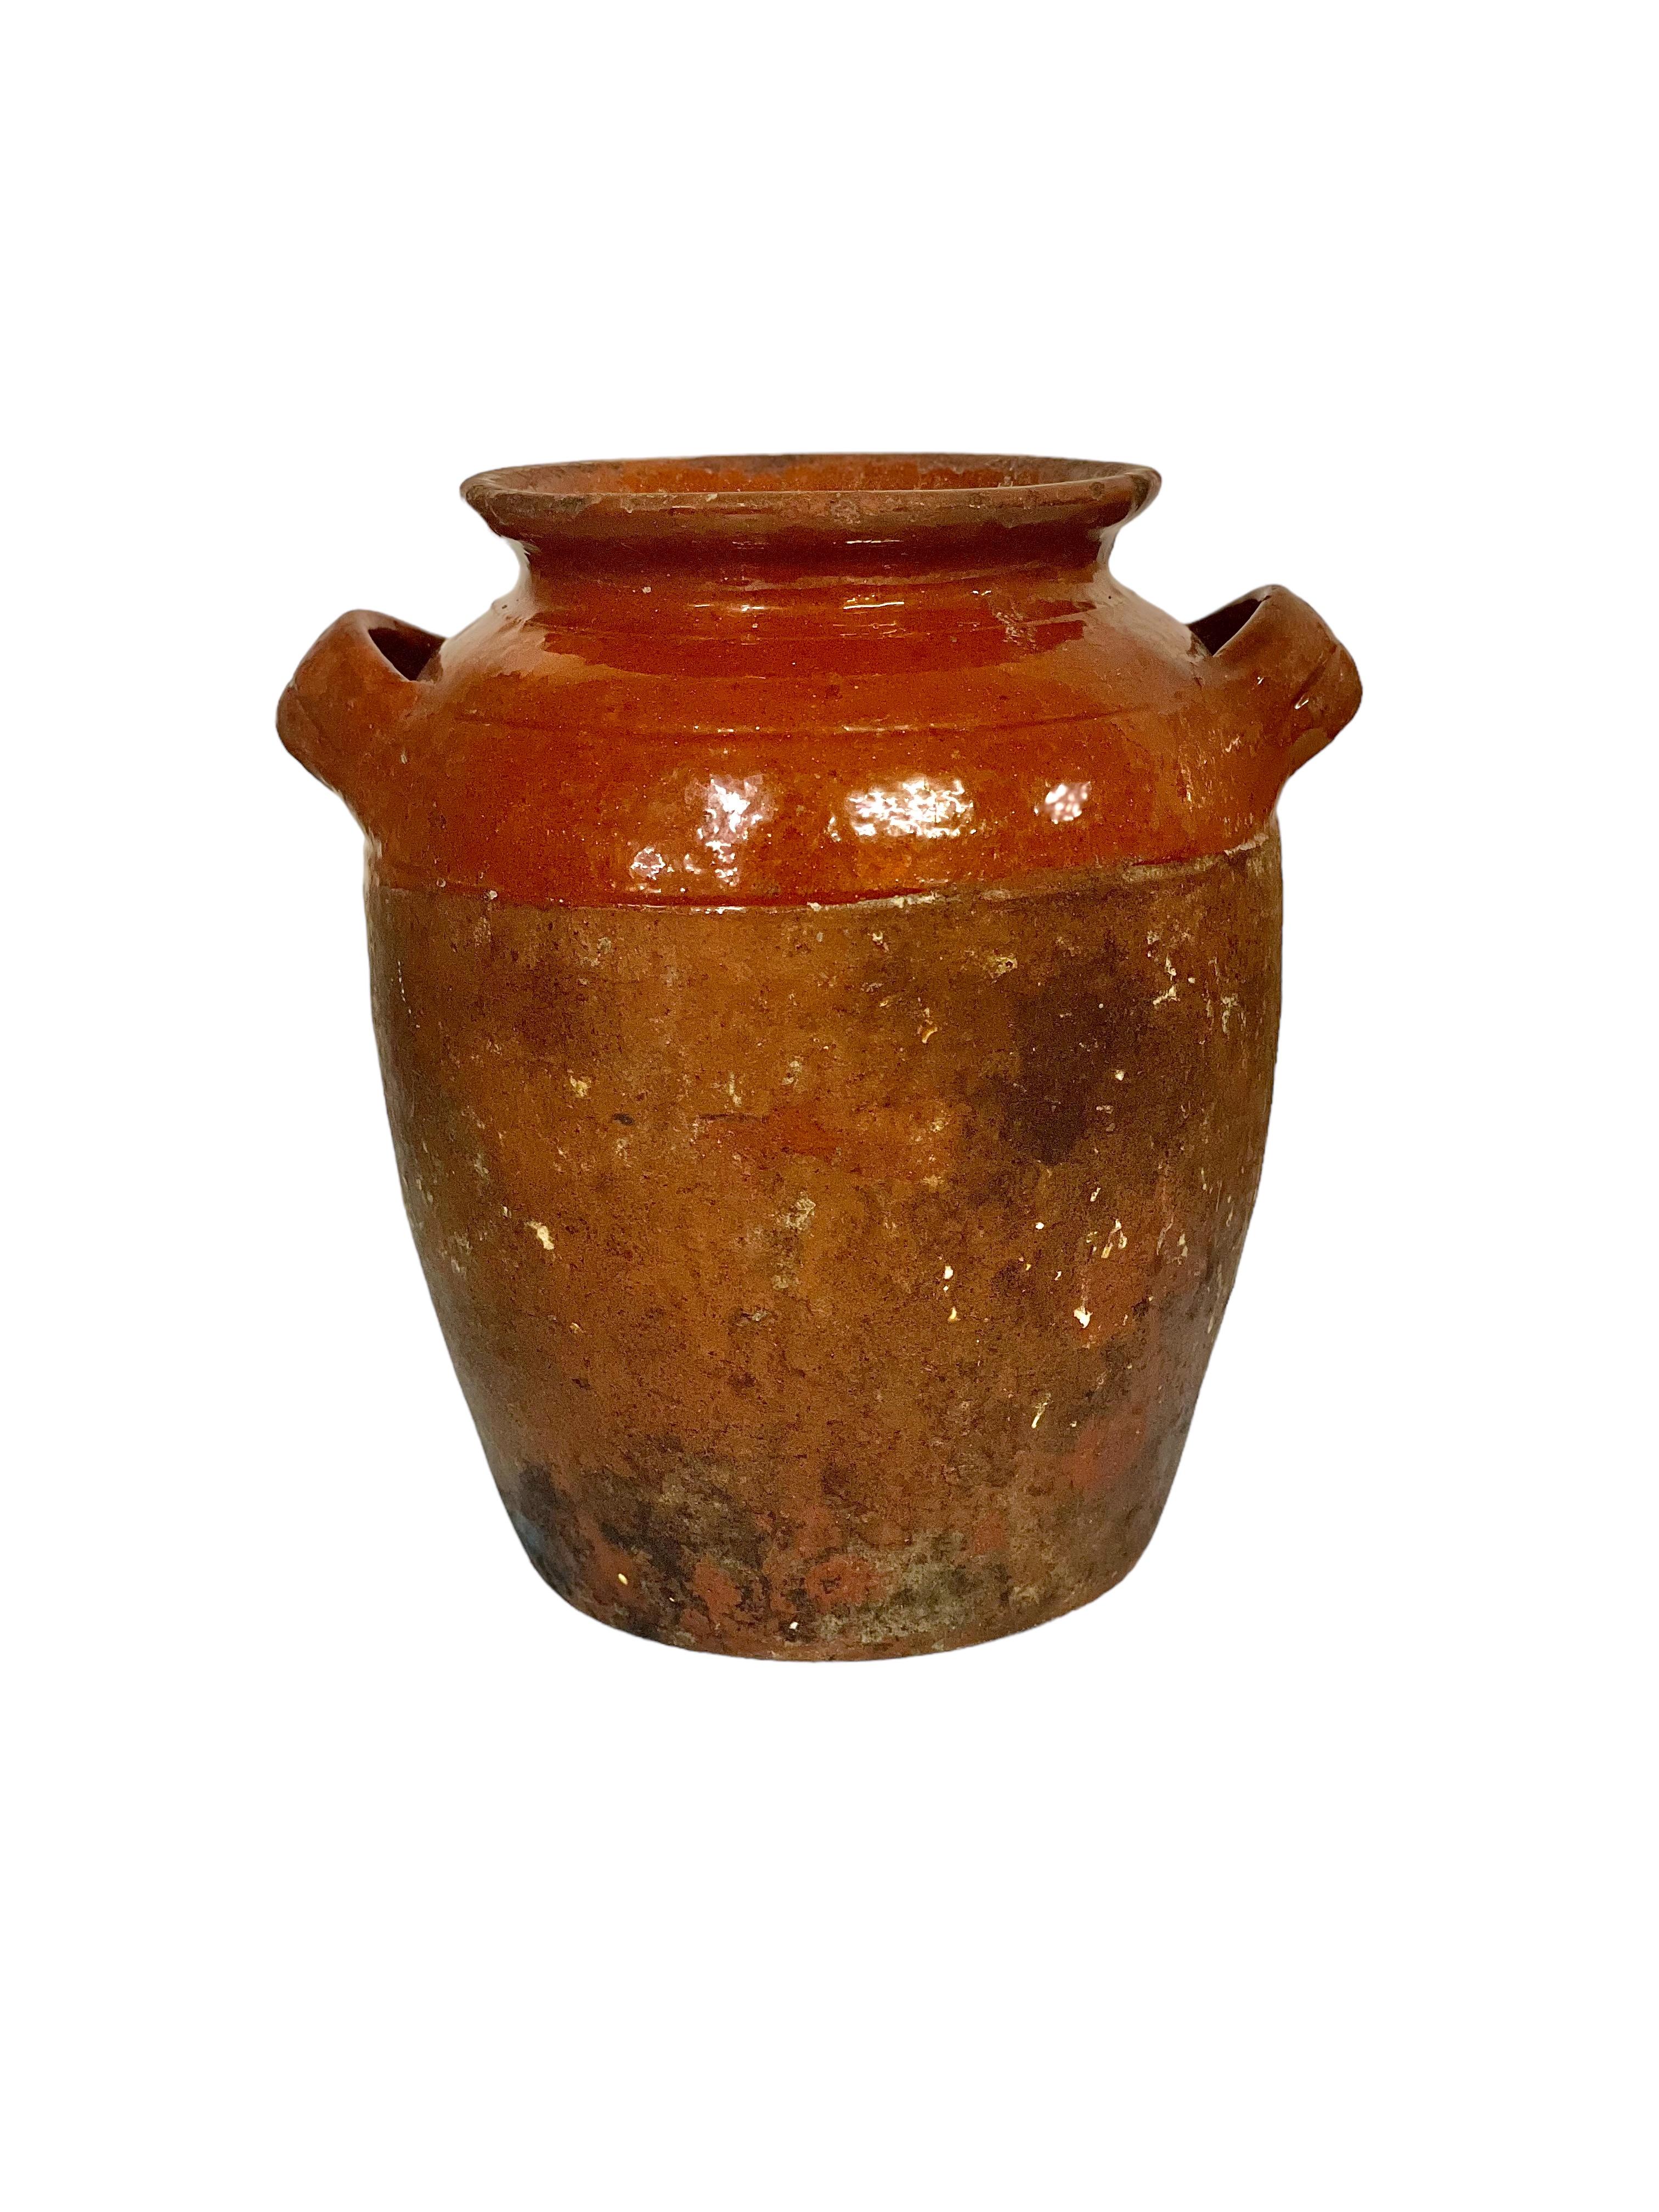 A small and beautifully shaped Provençal 'Confit Pot', made from traditional terracotta, and featuring the customary half-glazed exterior. Two elegantly formed side handles complete its practical design. These quintessentially French clay pots had